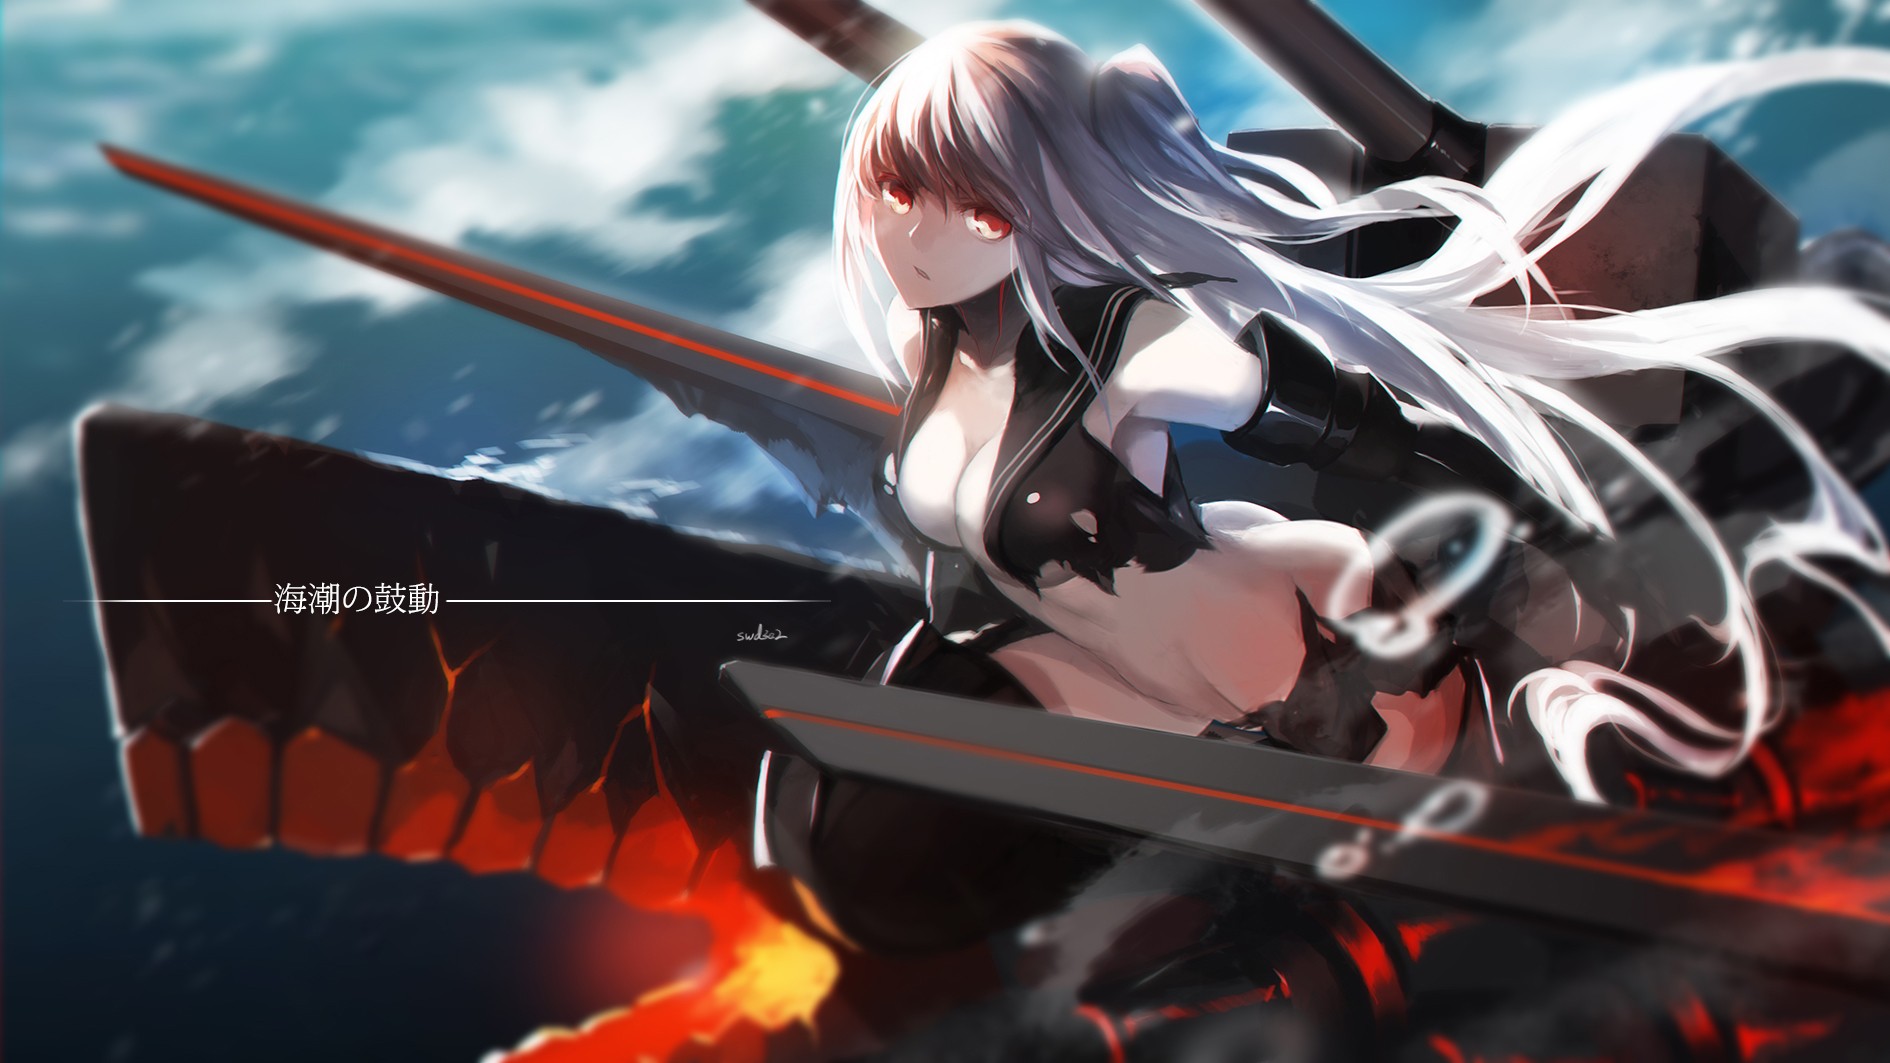 Kantai Collection Aircraft Carrier Hime Swd3e2 Torn Clothes Sky Clouds Long Hair Anime Girls Anime R 1890x1063